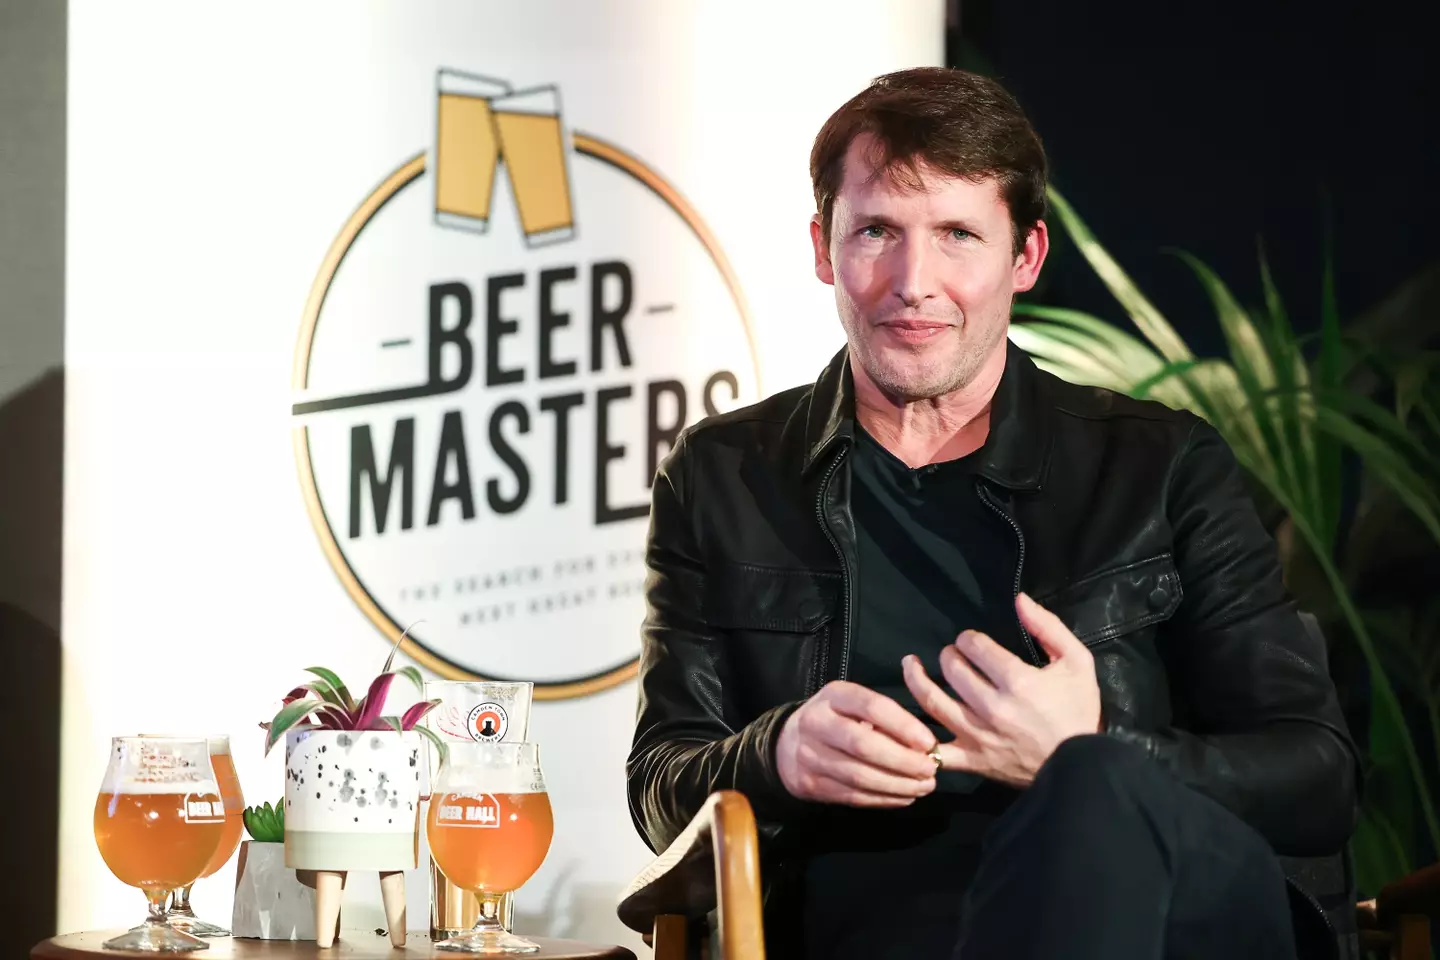 Blunt is currently hosting Beer Masters on Amazon Prime Video.